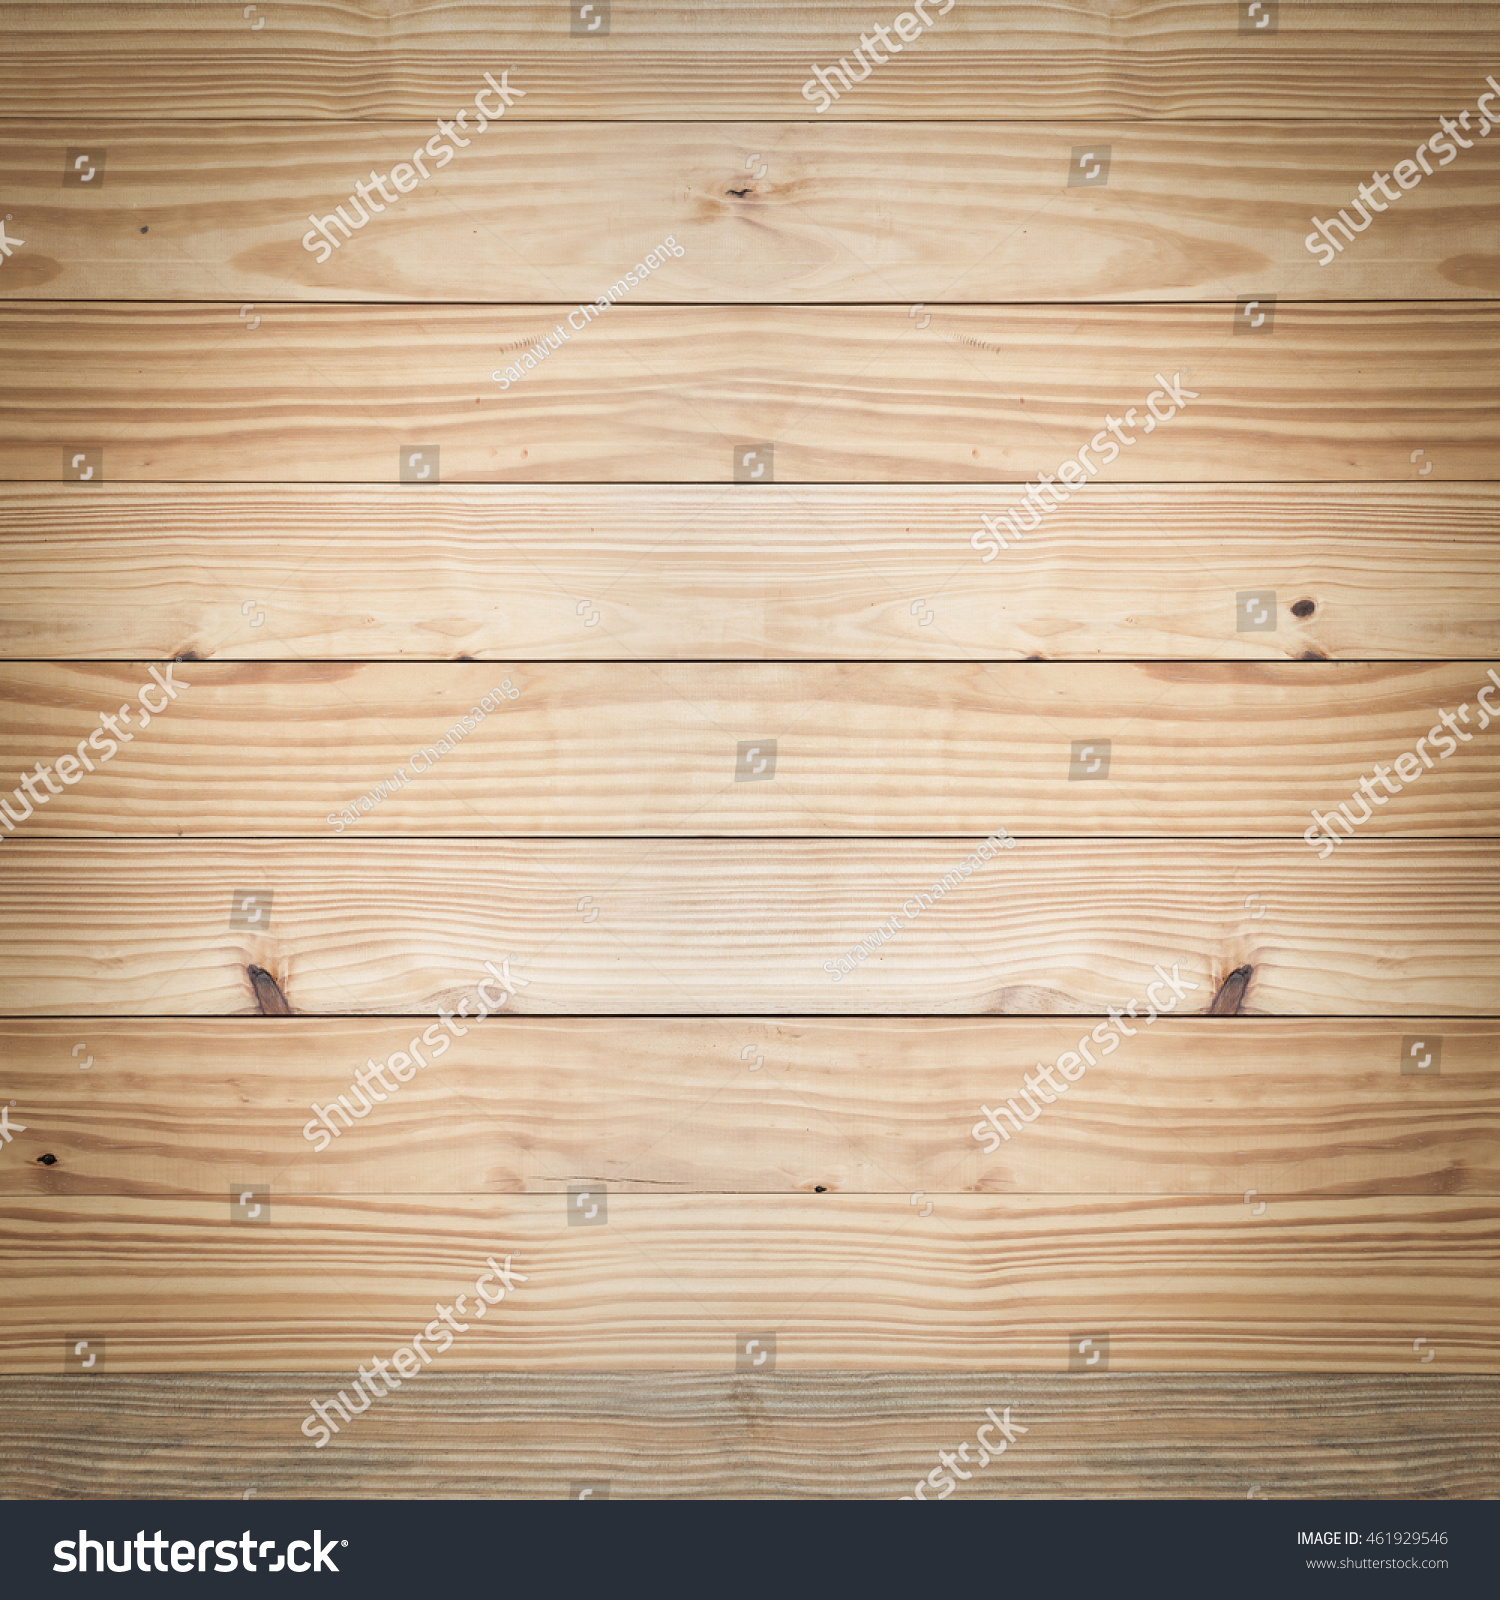 Wood Plank Brown Texture Background Stock Photo 461929546 ...